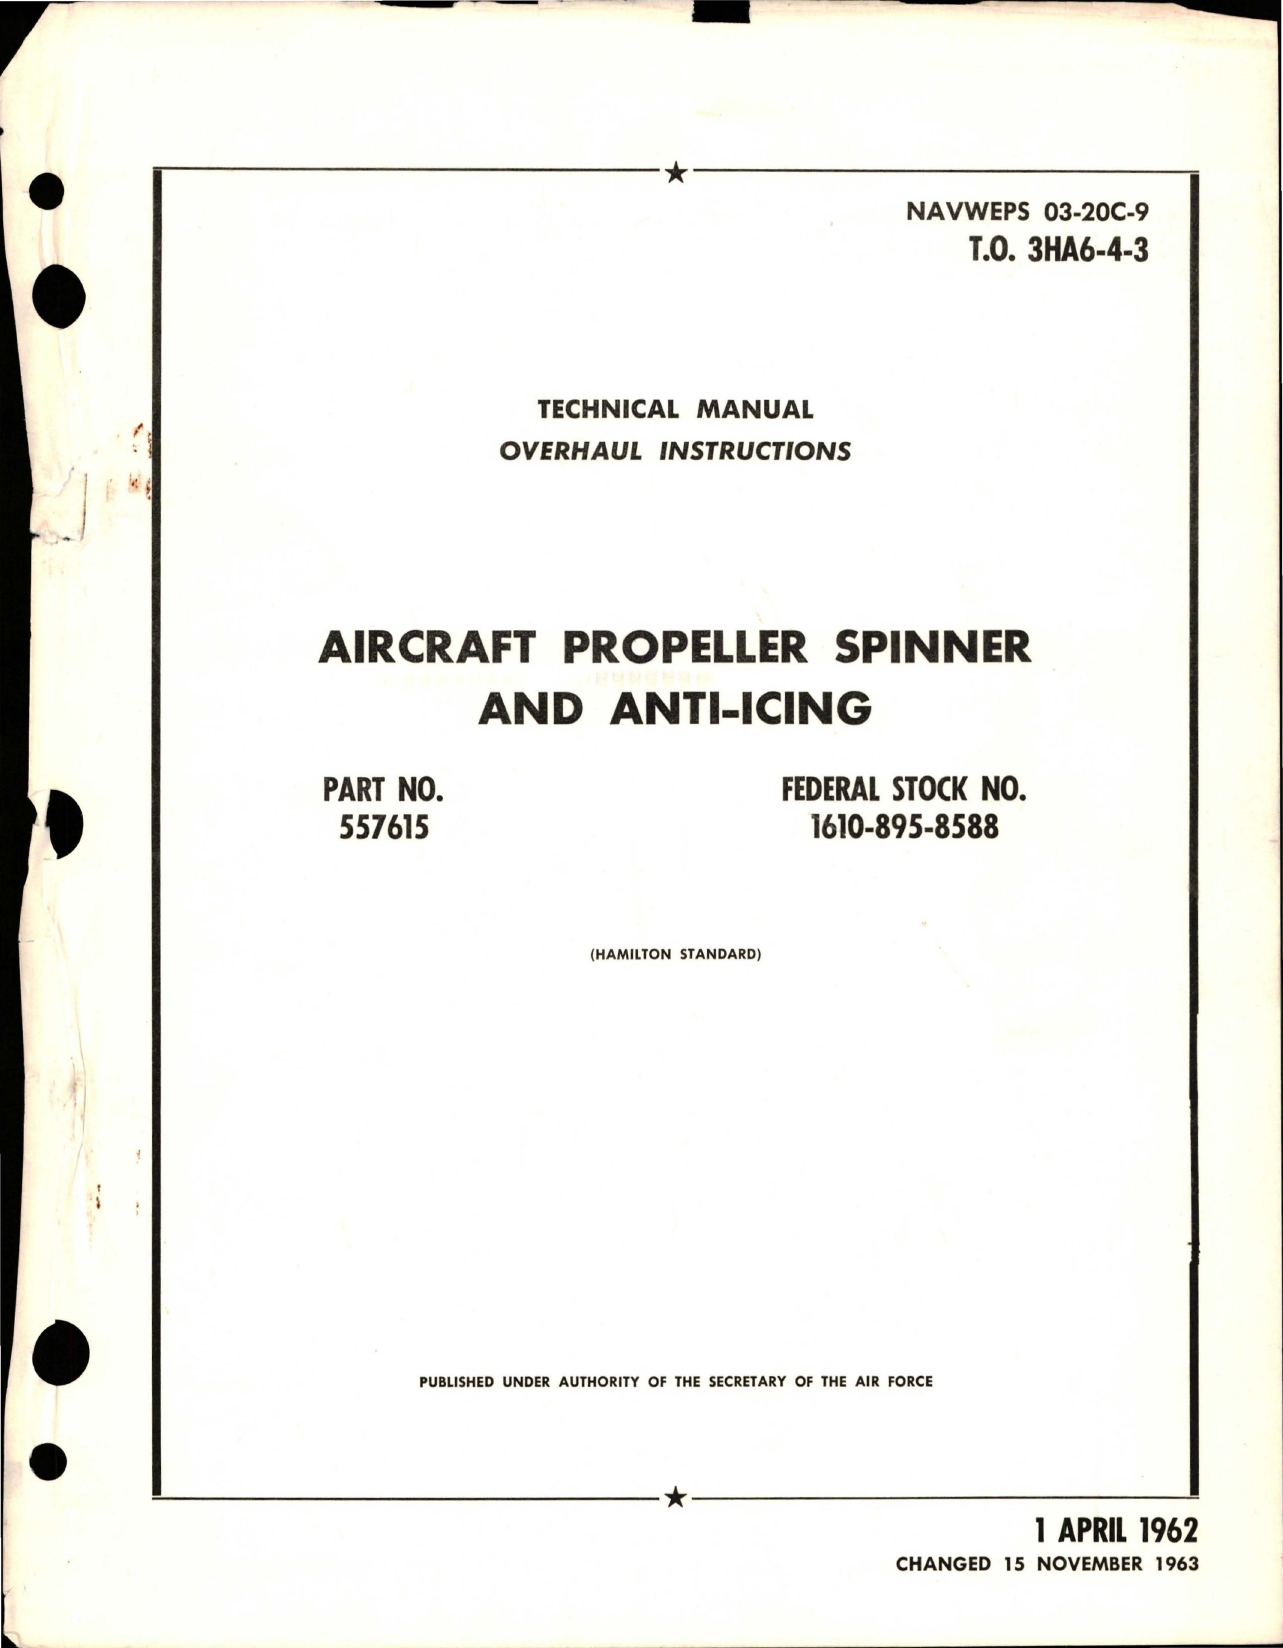 Sample page 1 from AirCorps Library document: Overhaul Instructions for Aircraft Propeller Spinner and Anti-Icing - Part 557615 